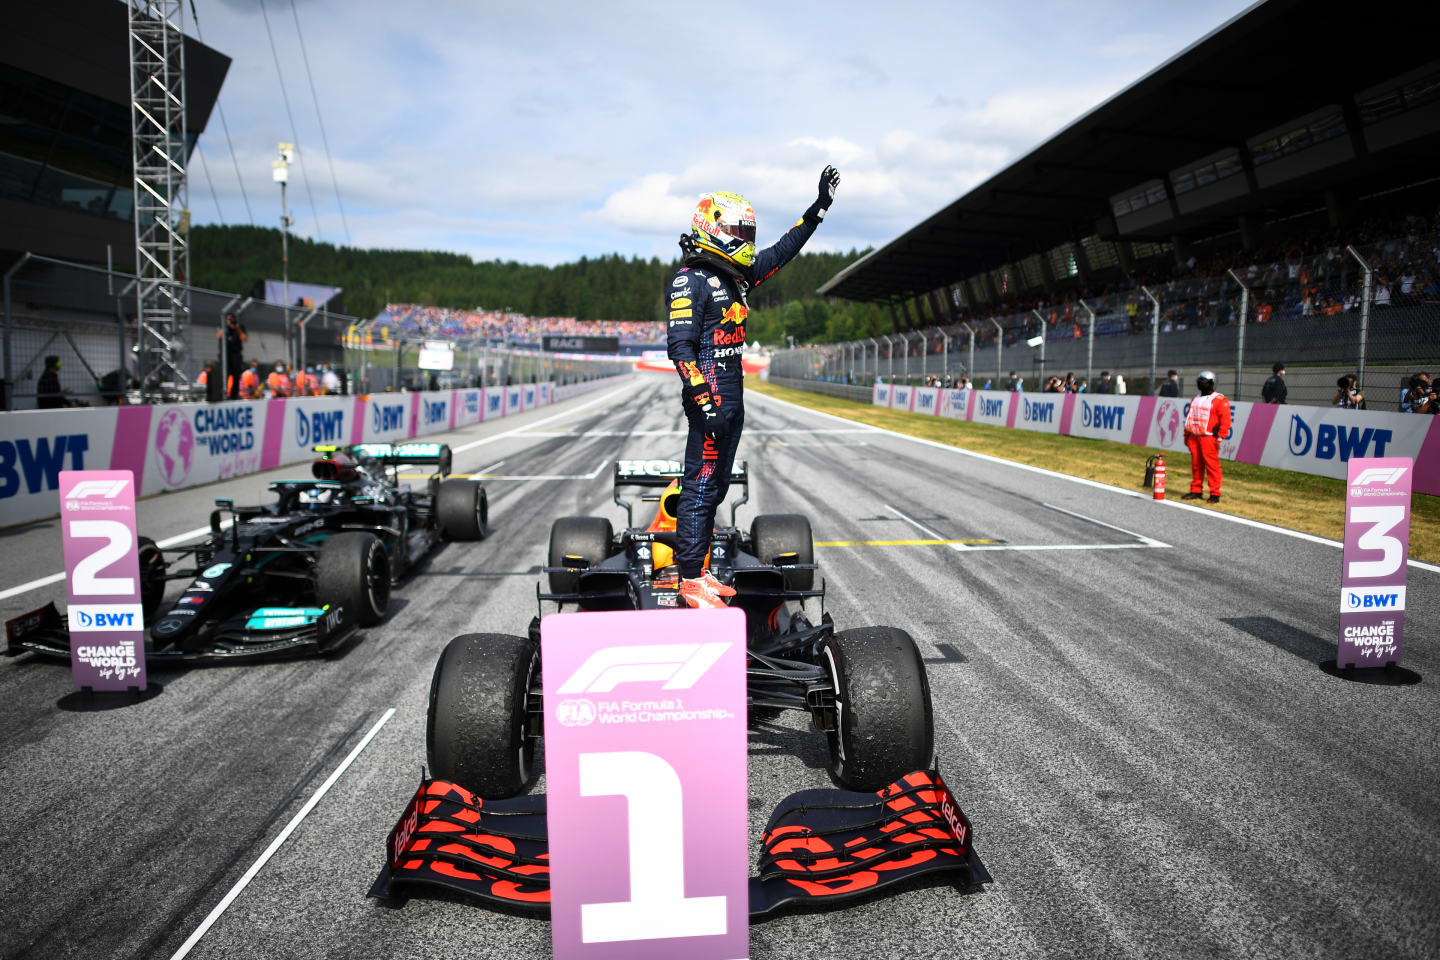 SPIELBERG, AUSTRIA - JULY 04: Race winner Max Verstappen of Netherlands and Red Bull Racing celebrates in parc ferme during the F1 Grand Prix of Austria at Red Bull Ring on July 04, 2021 in Spielberg, Austria. (Photo by Christian Bruna - Pool/Getty Images)